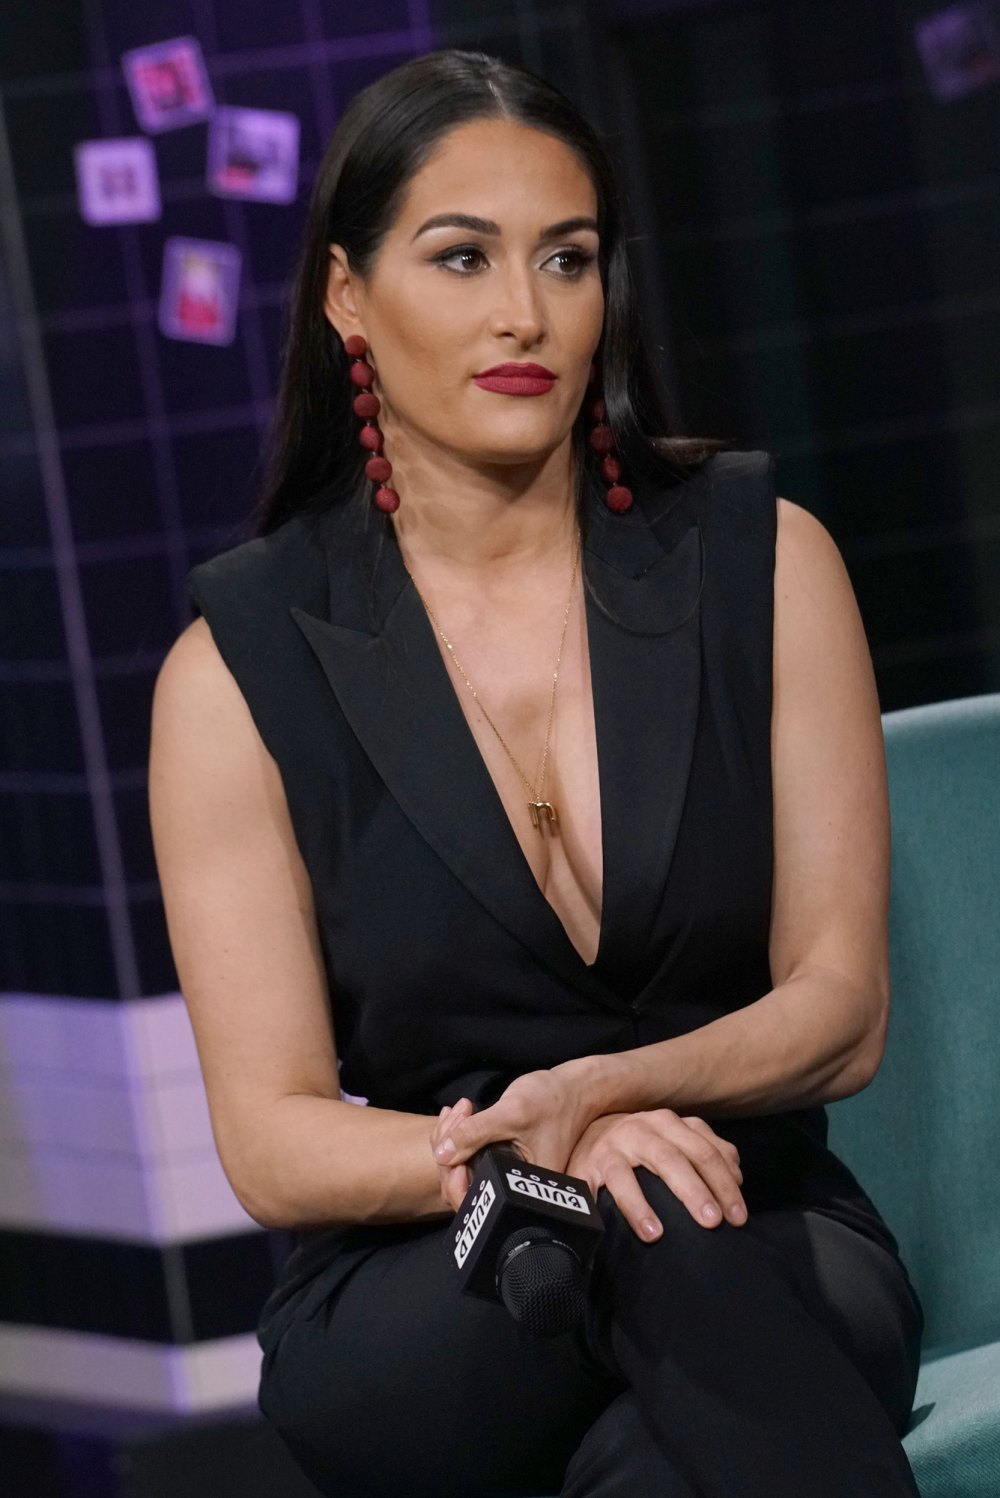 Nikki Bella’s Doctors Found a Cyst on Her Brain Before Her WWE Retirement